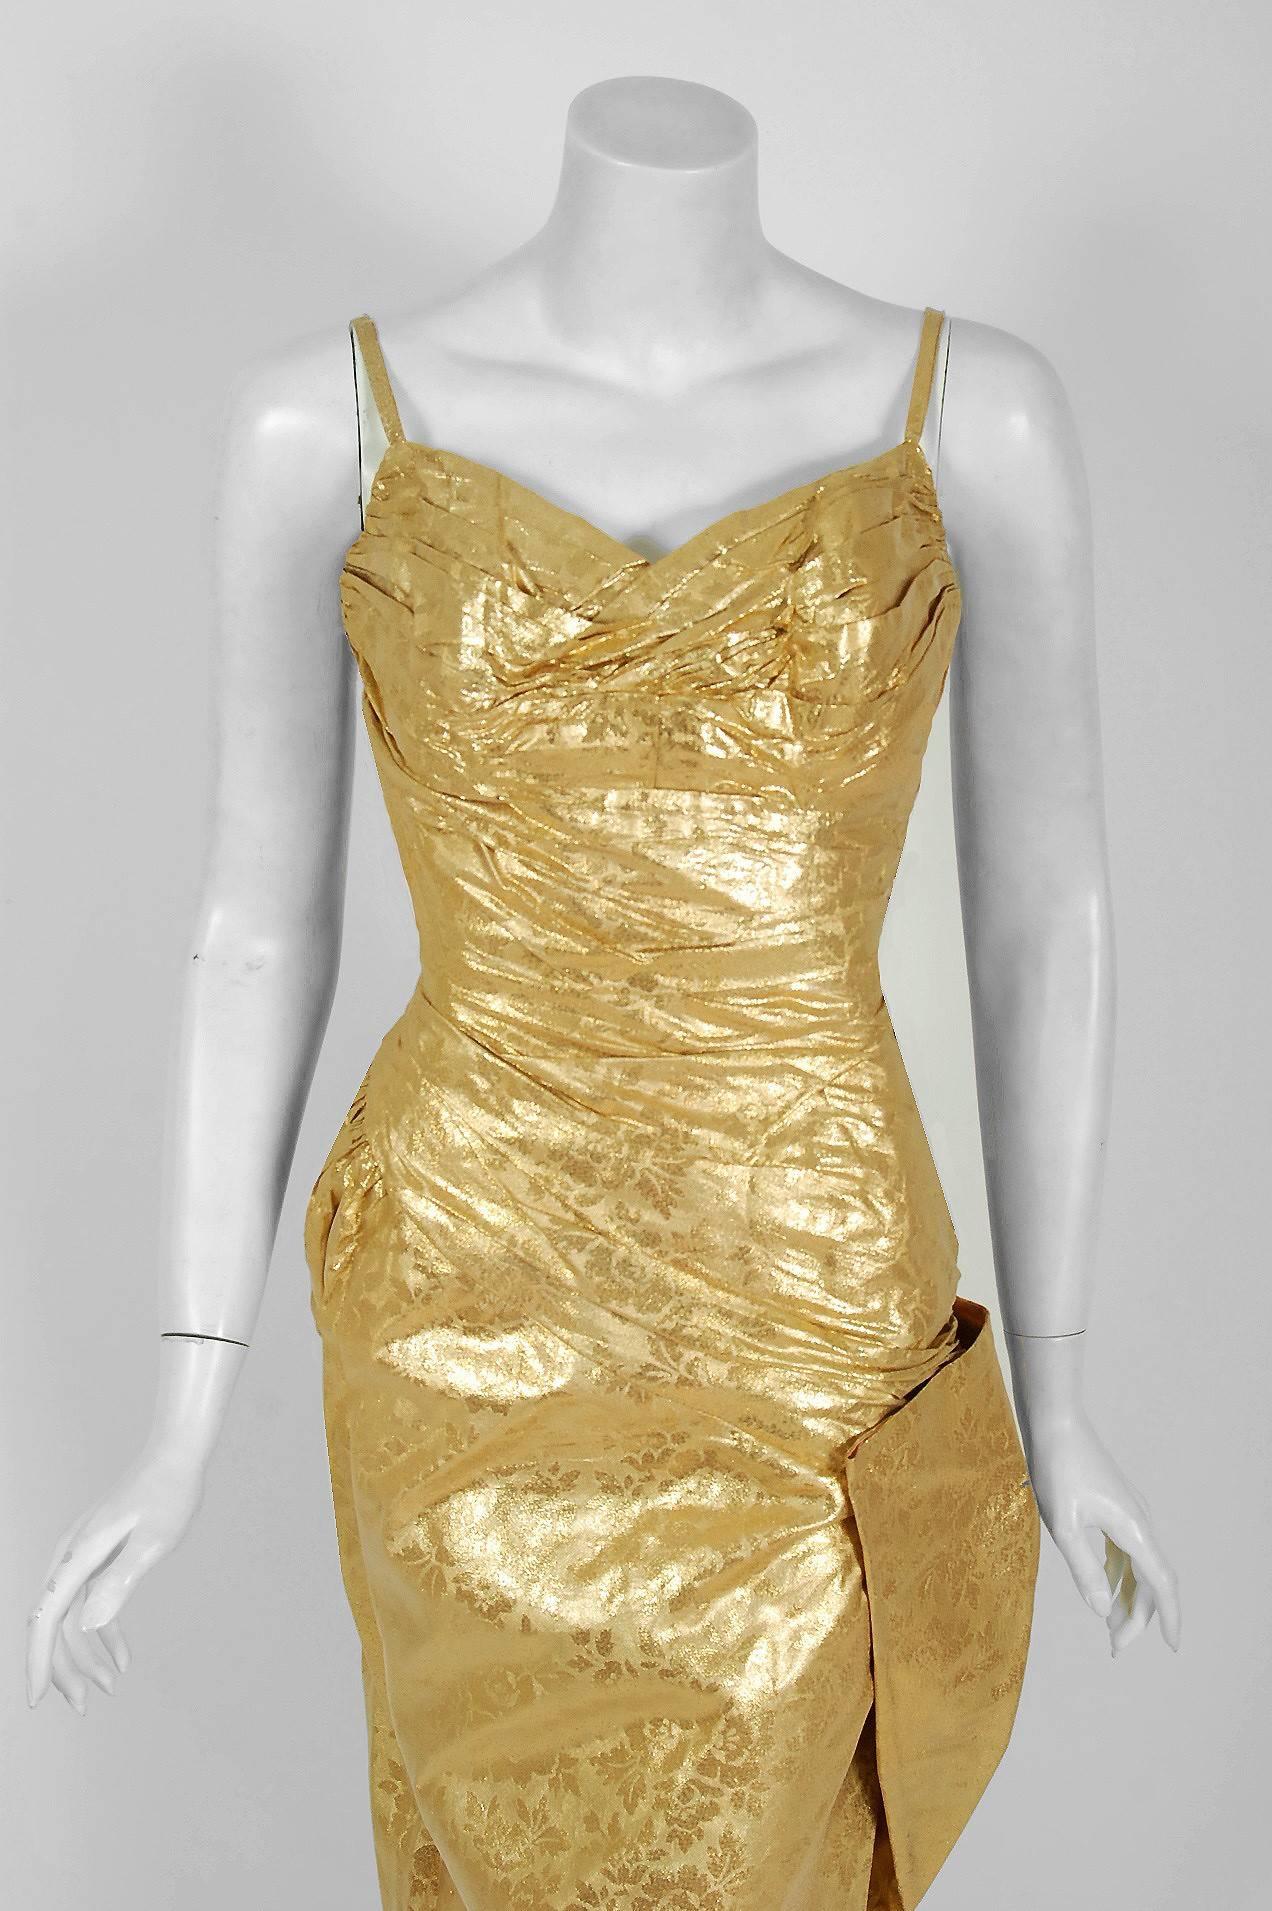 Stunning 1950's "Beaumelle" designer metallic-gold bombshell cocktail dress from the Old Hollywood era of glamour! The fabric itself is a masterpiece; shimmering floral-print metallic gold lined silk lamé. The bodice is an alluring low-cut